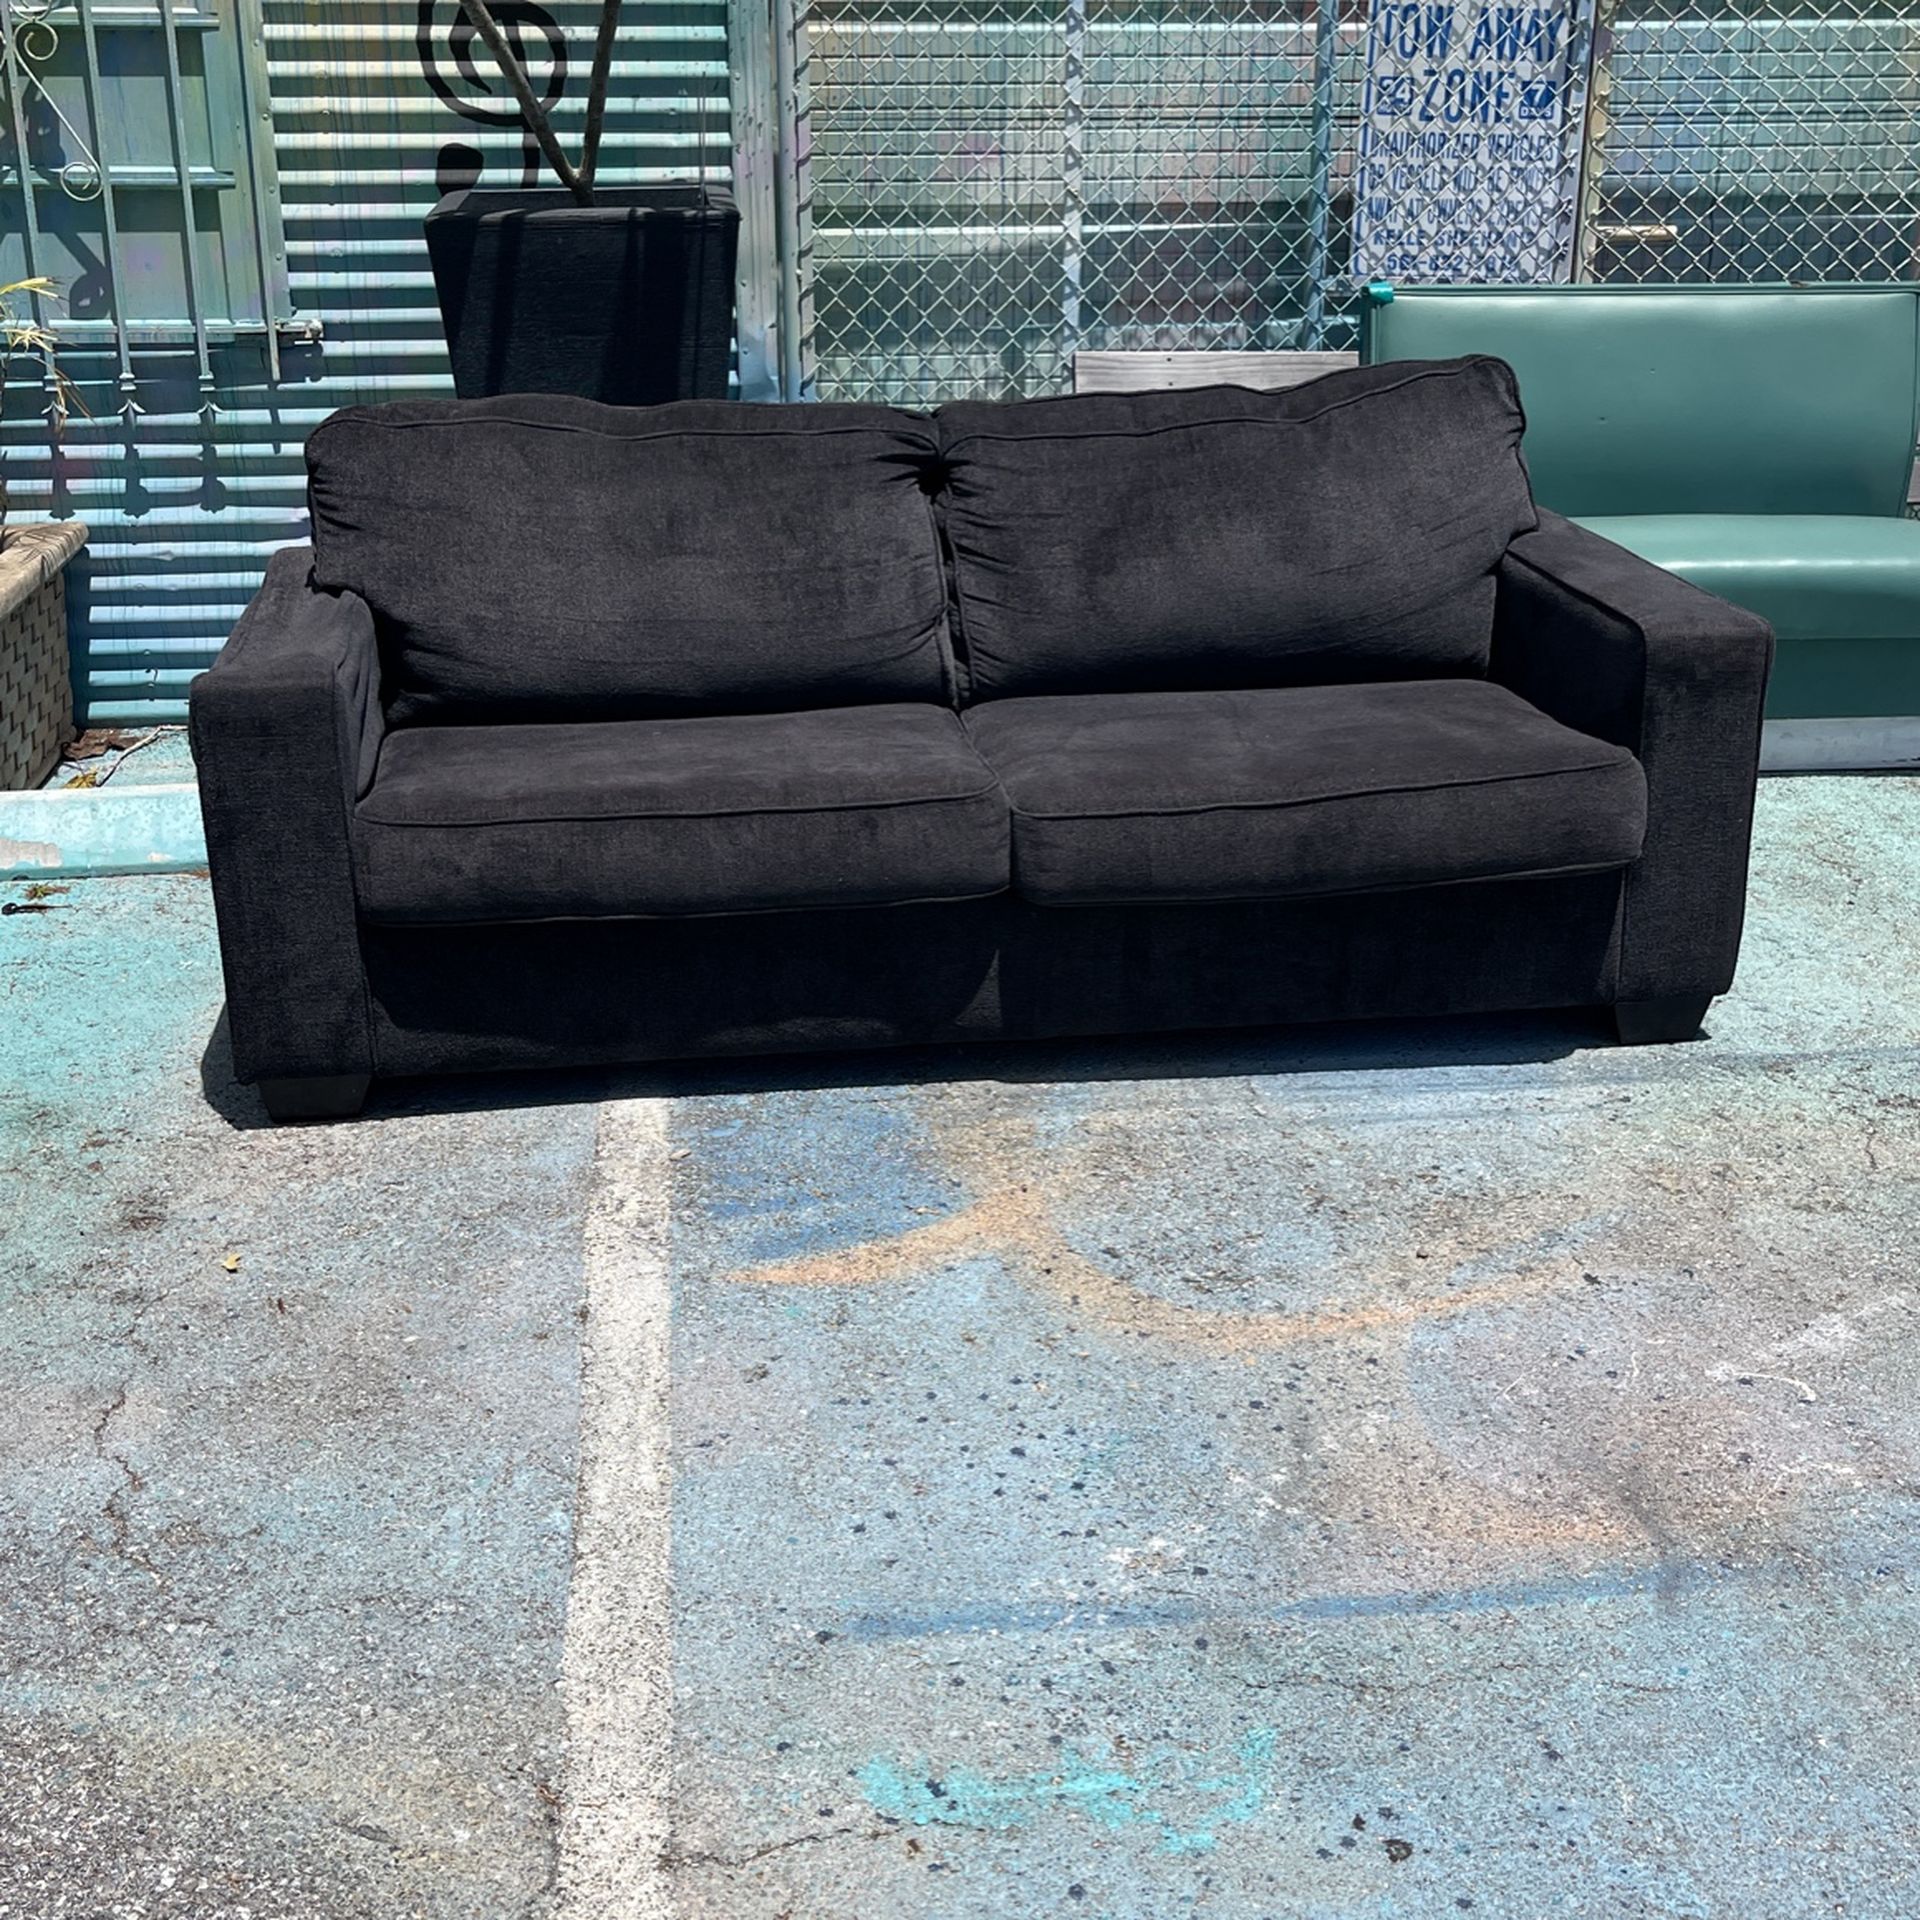 Free black couch